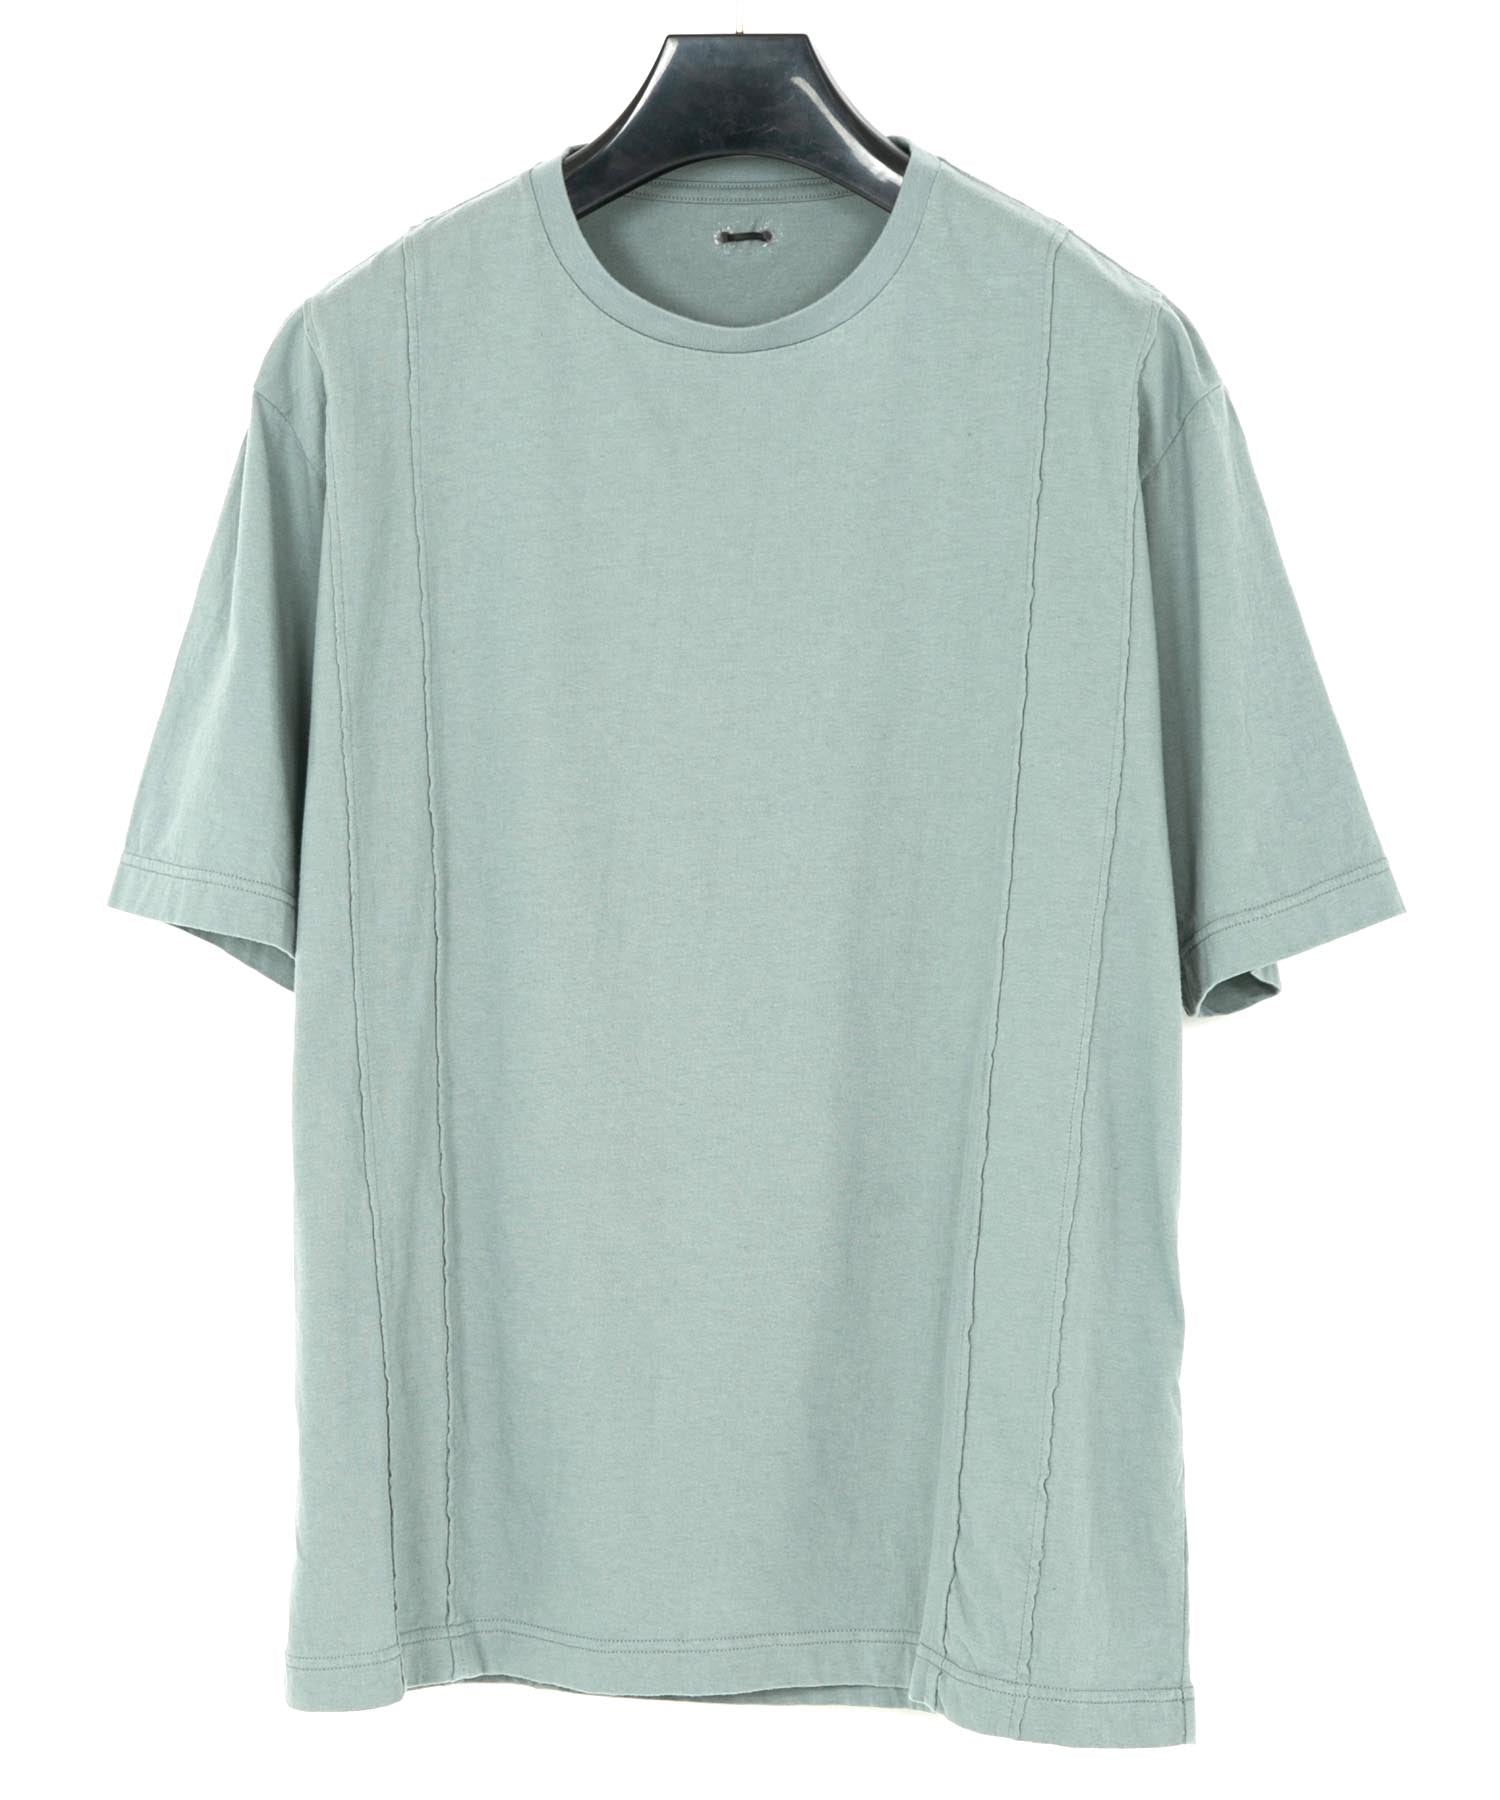 Load image into Gallery viewer, Natural Soft Cotton Oversize Crew Neck T-shirt - BLUE GRAY